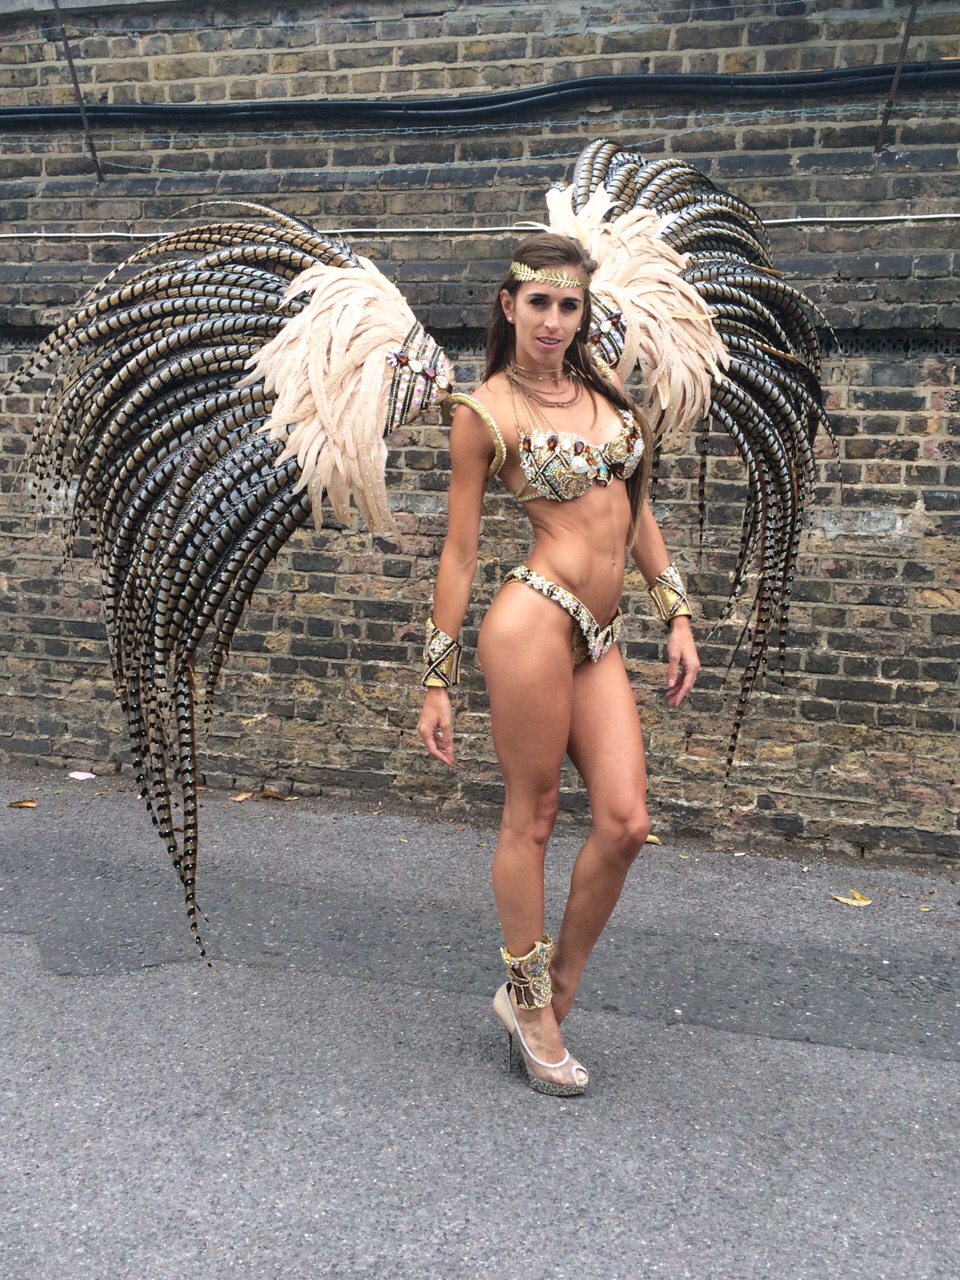 very pretty wire bra for Trinidad Carnival 2k15  Carnival outfits,  Carnival fashion, Burlesque costume